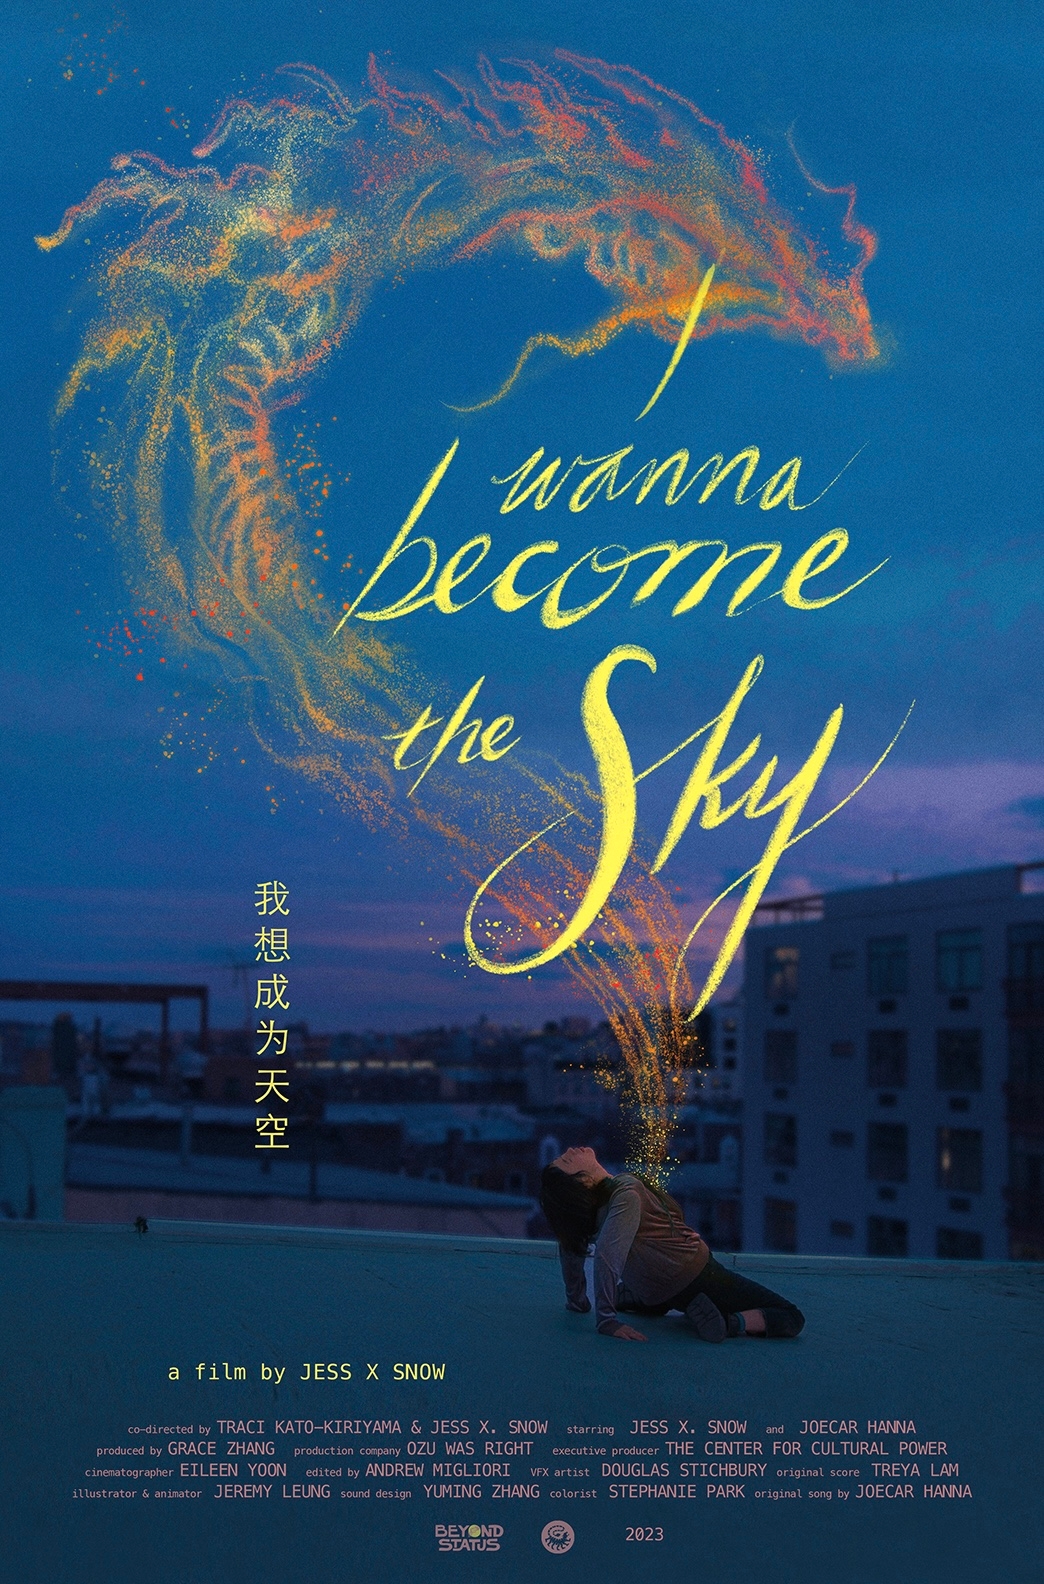 image of a person kneeling on a roof with a sparkling dragon emerging from their chest and the words "I Wanna Become The Sky"